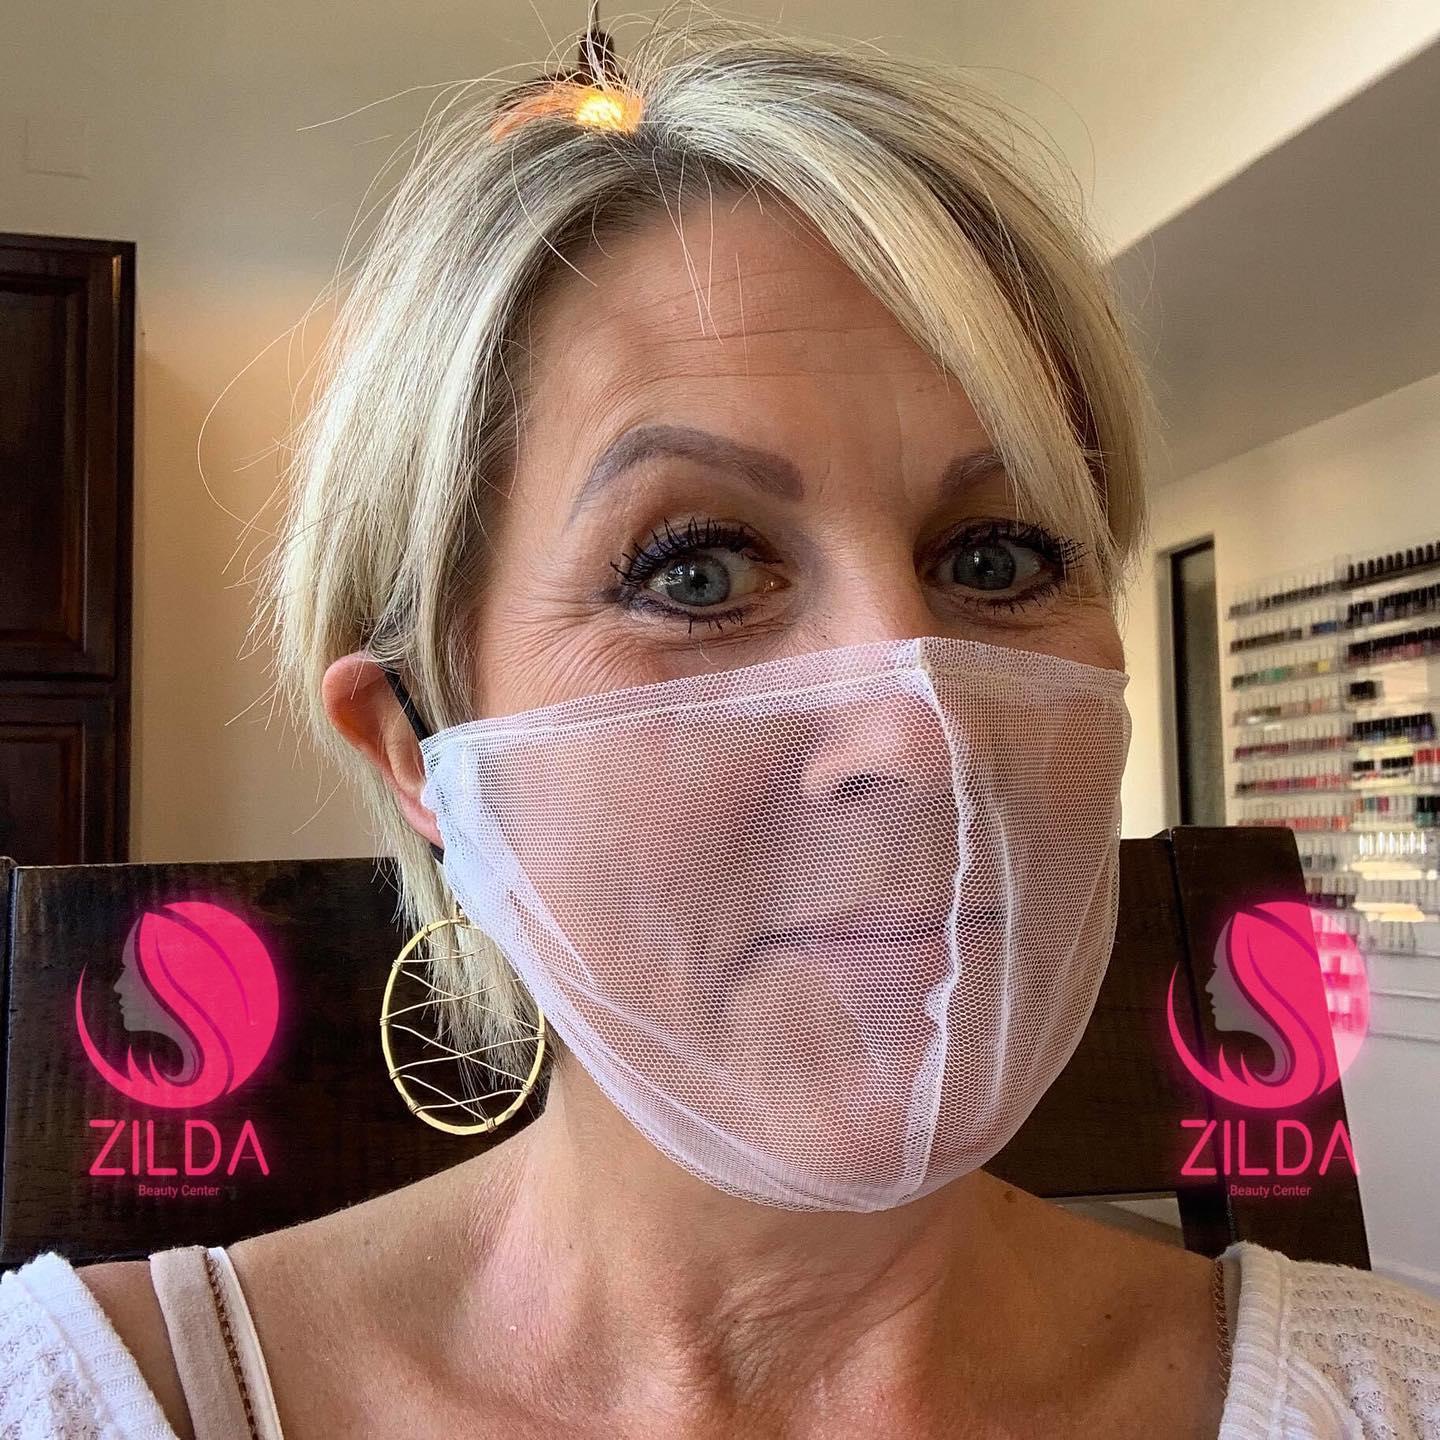 annuleren knelpunt alias Breathable' Mesh Face Masks Are Being Bought and Worn by Karens Everywhere